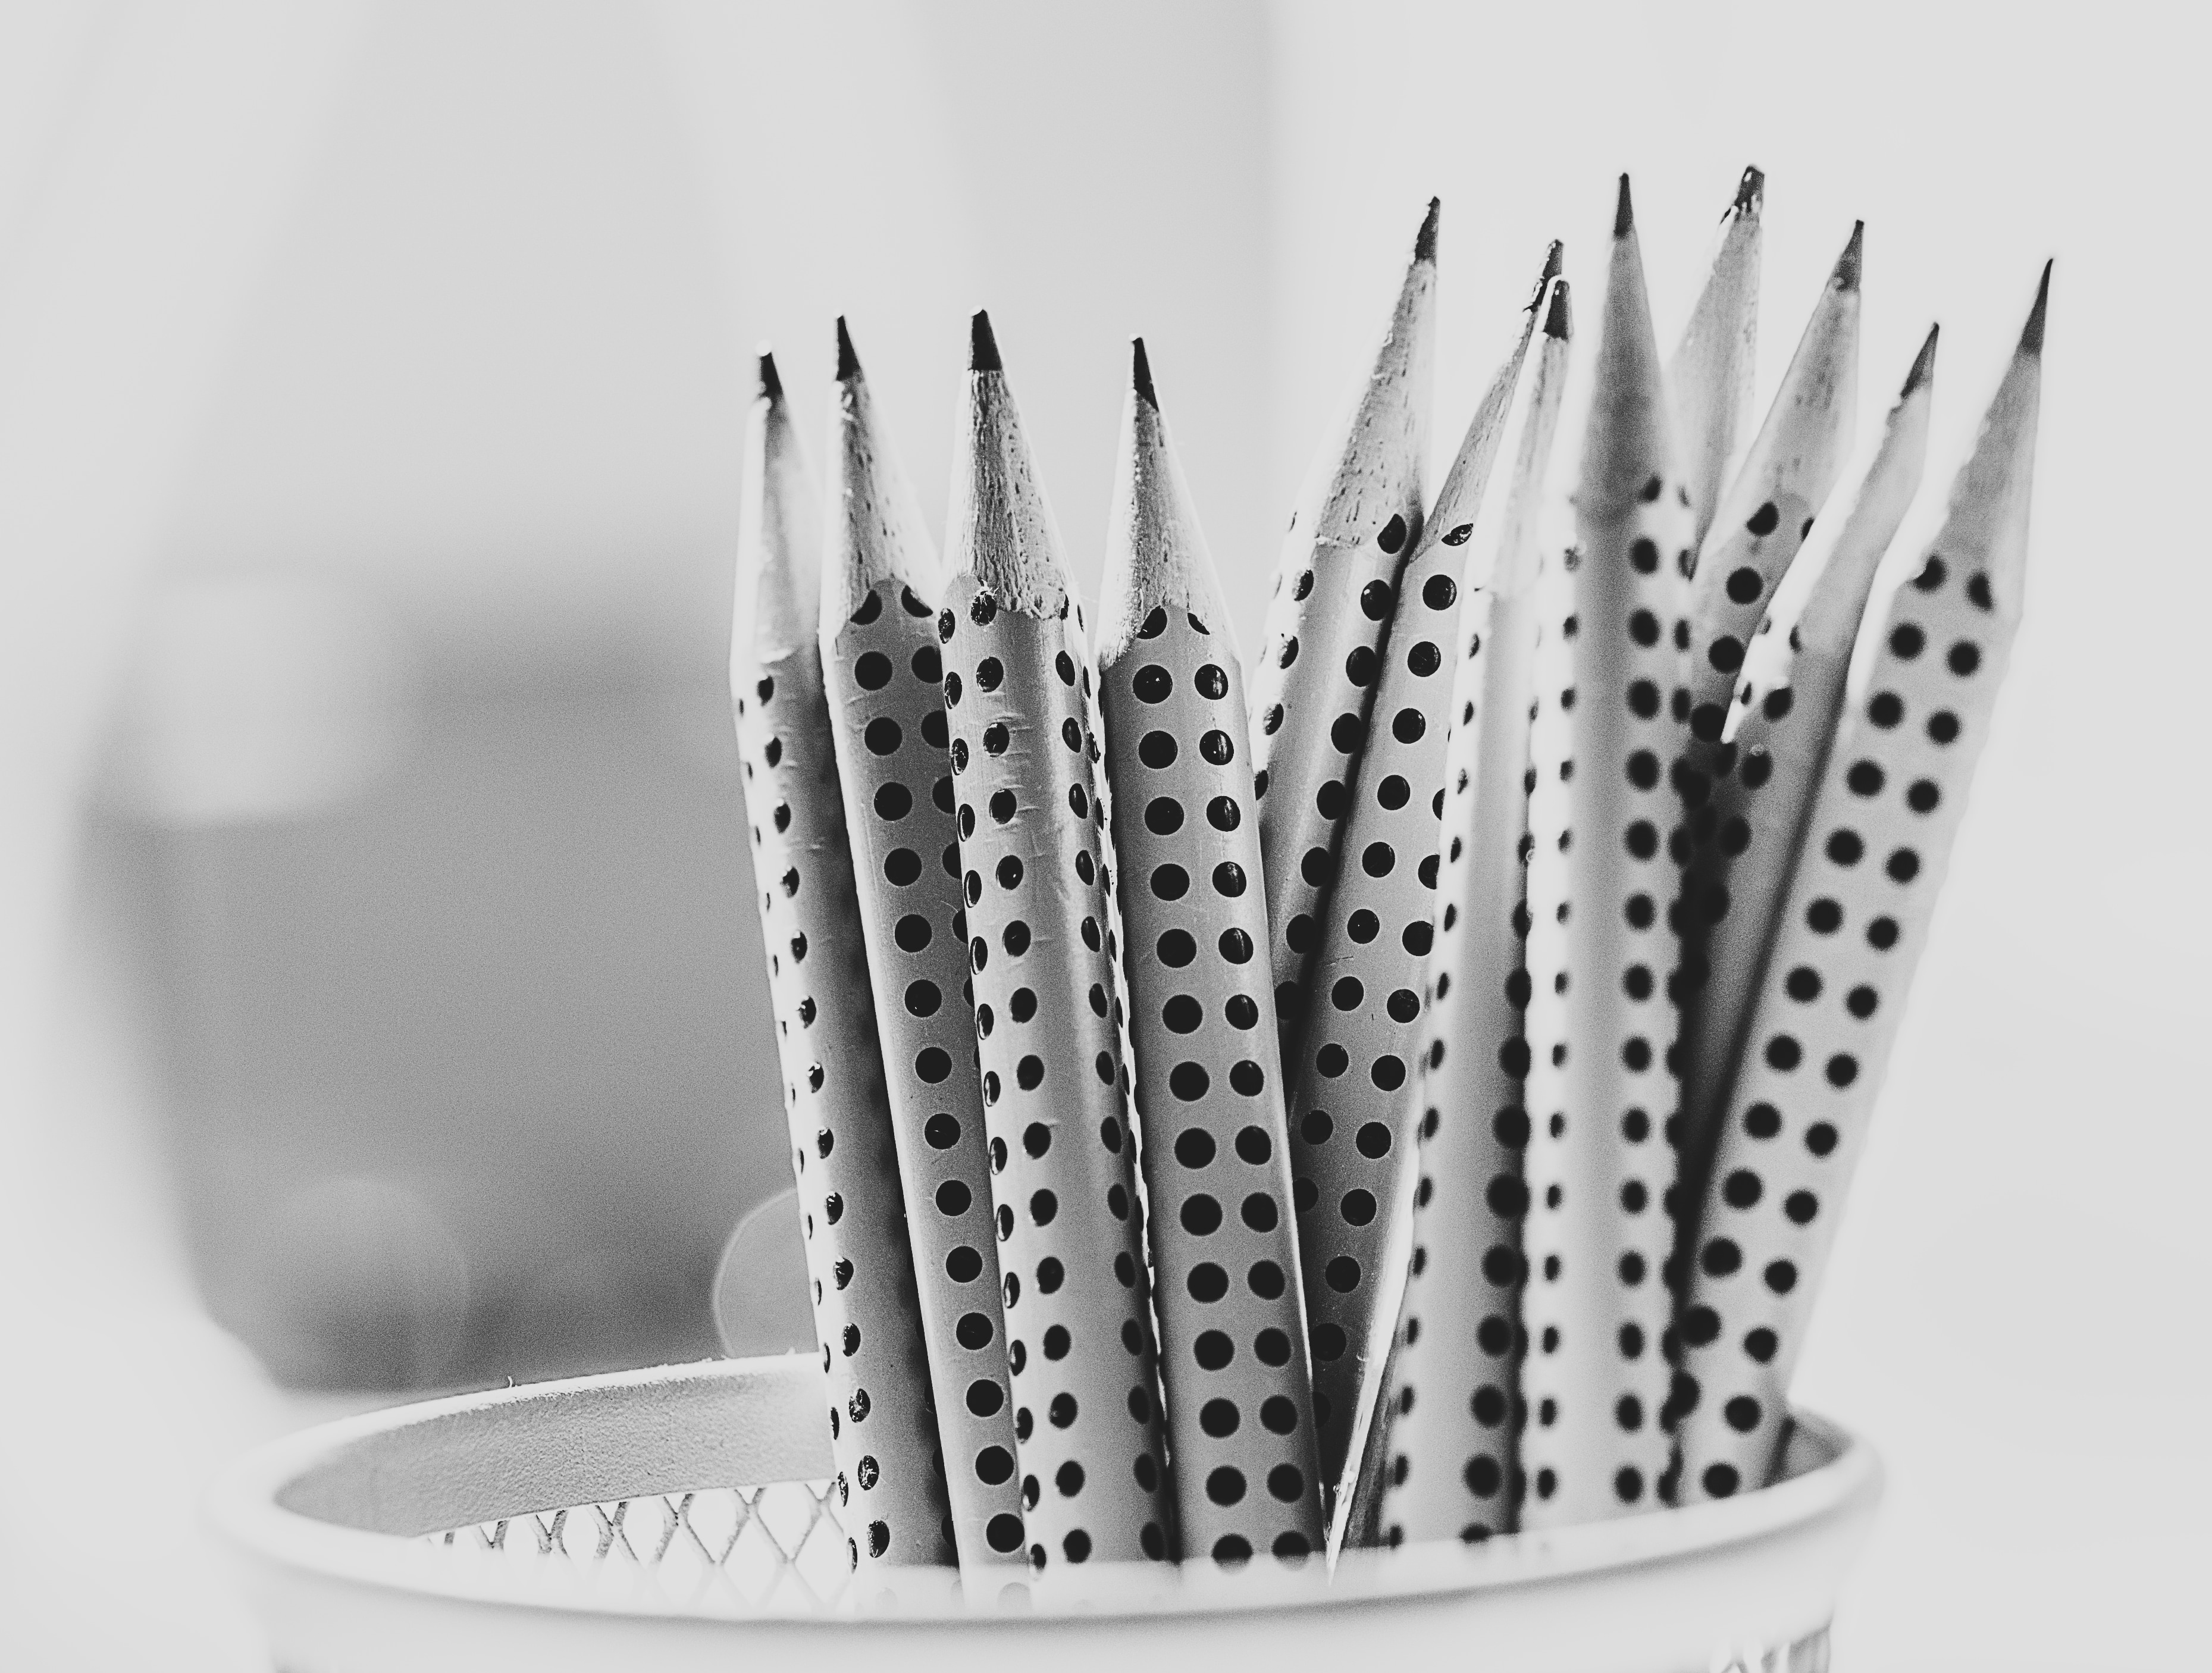 grayscale photo of pencils in pencil holder